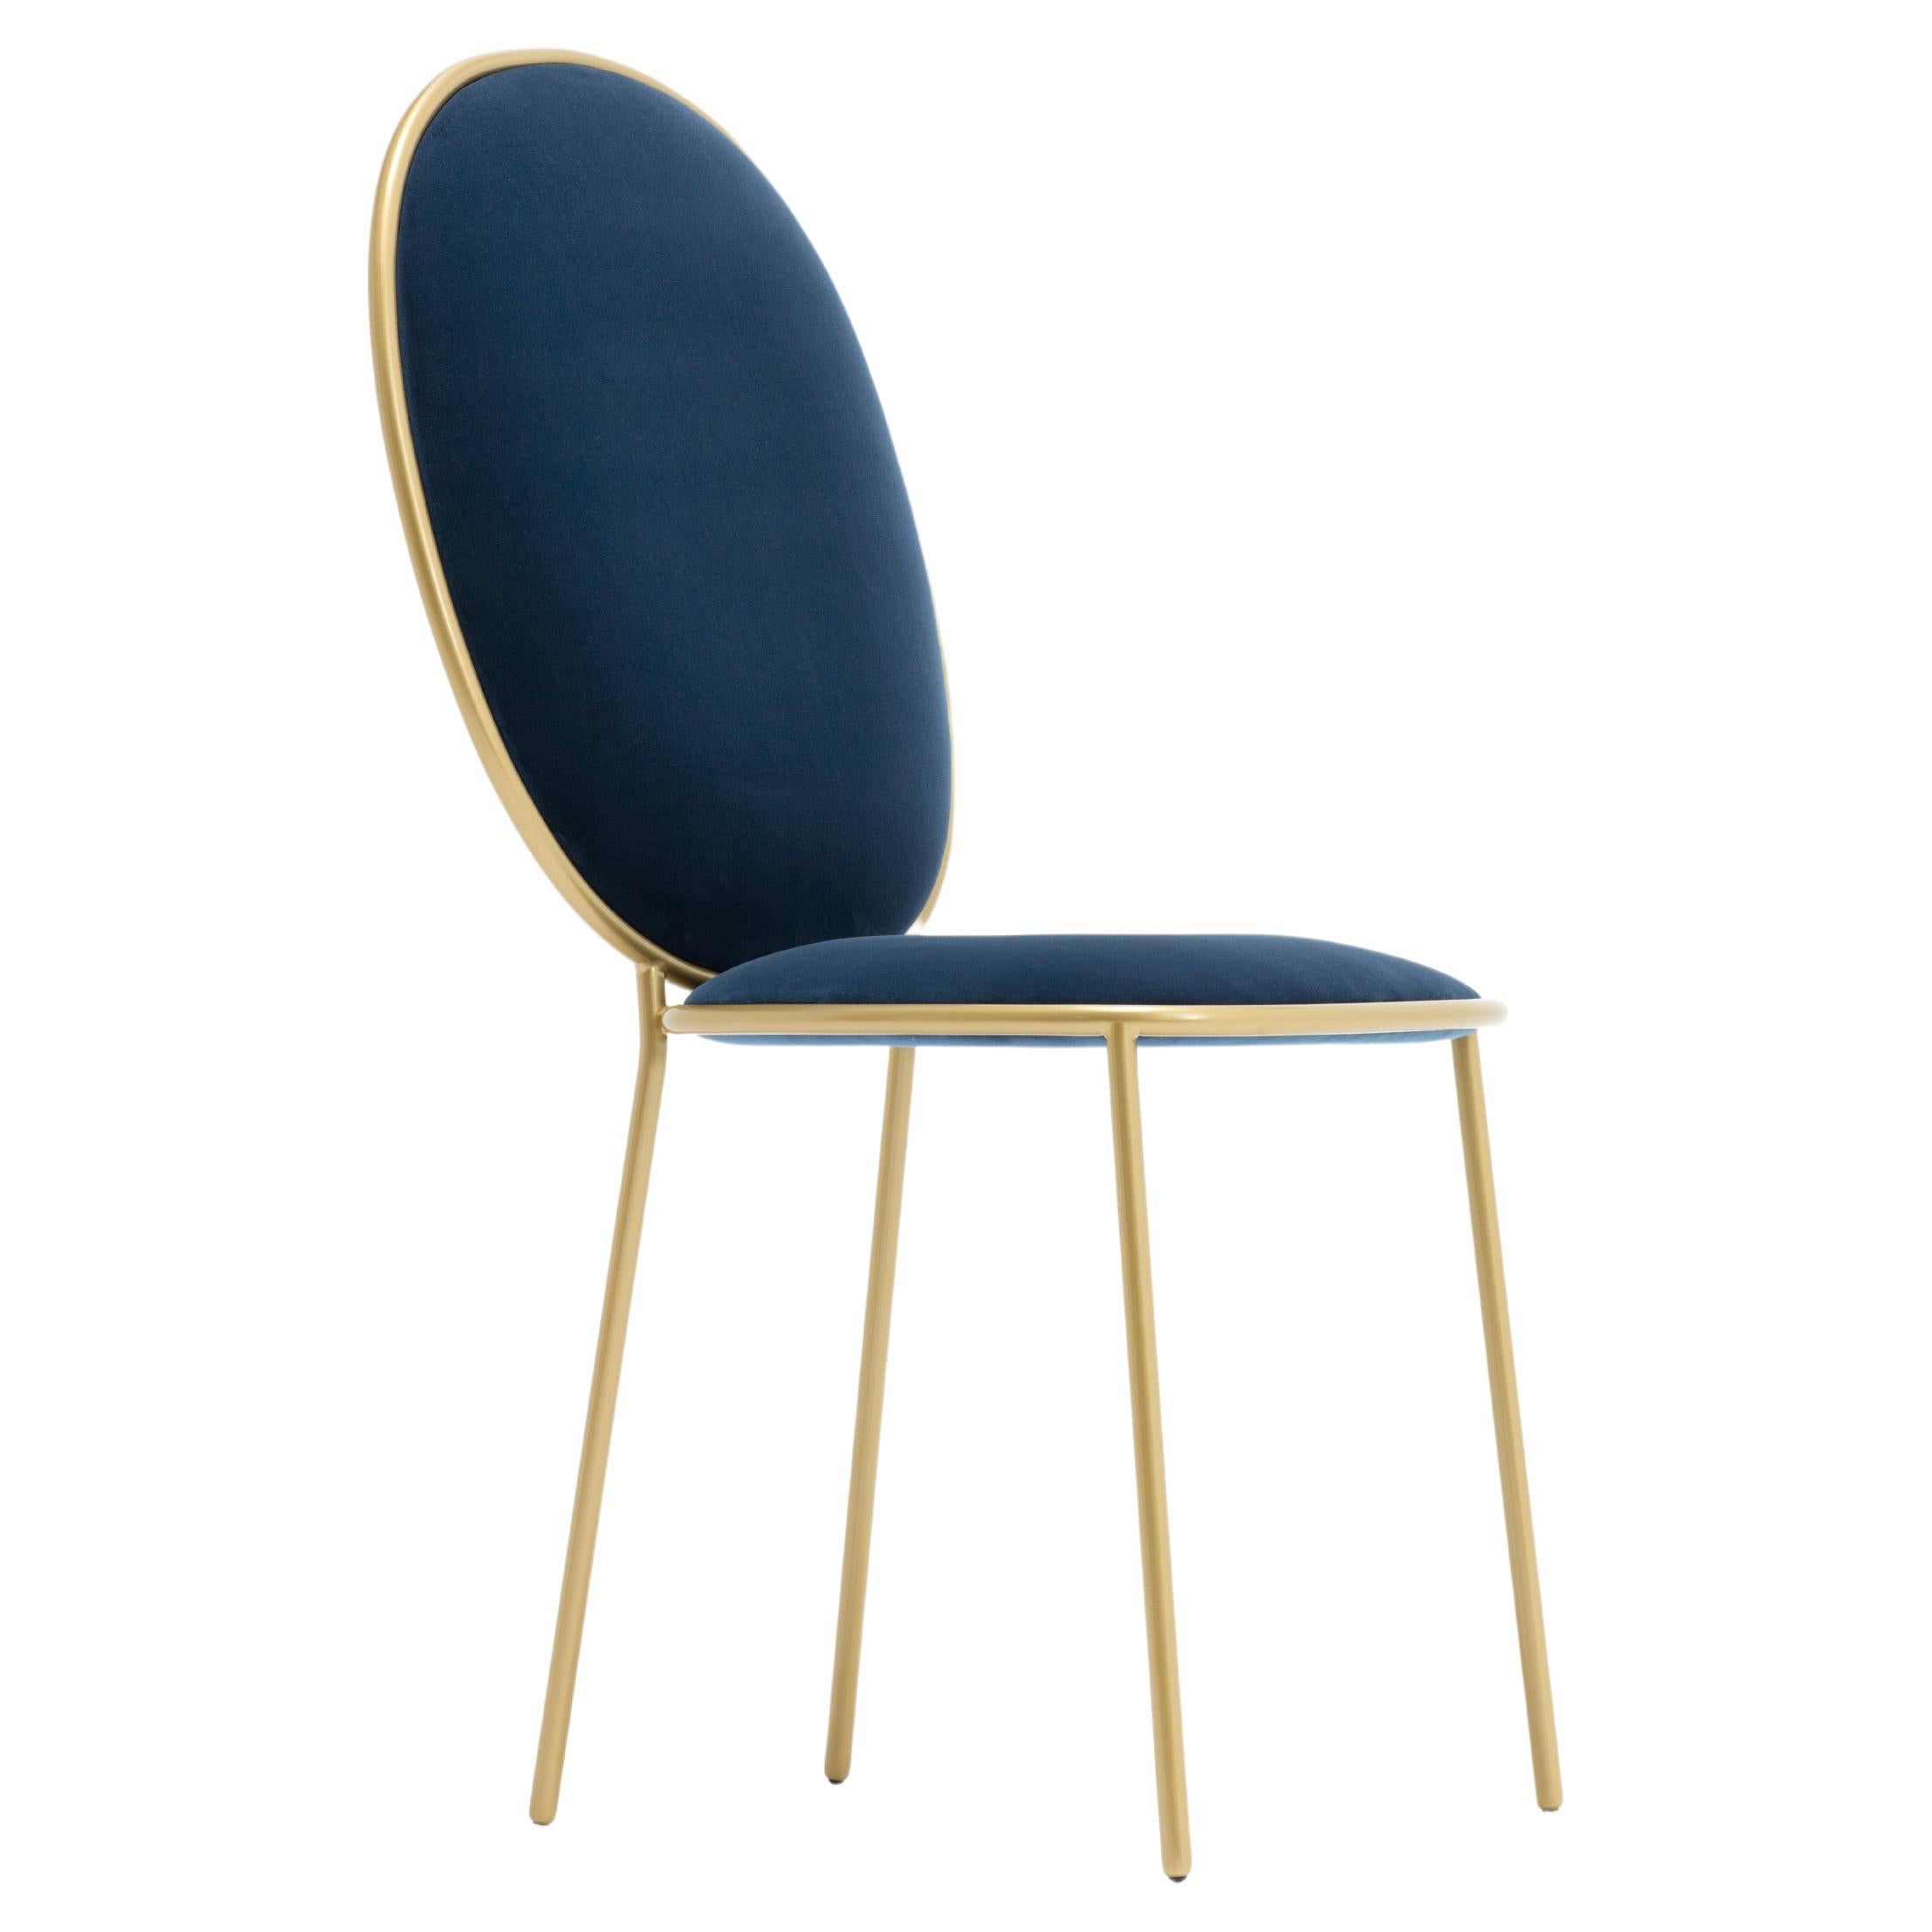 Contemporary Indigo Blue Velvet Upholstered Dining Chair, Stay by Nika Zupanc For Sale